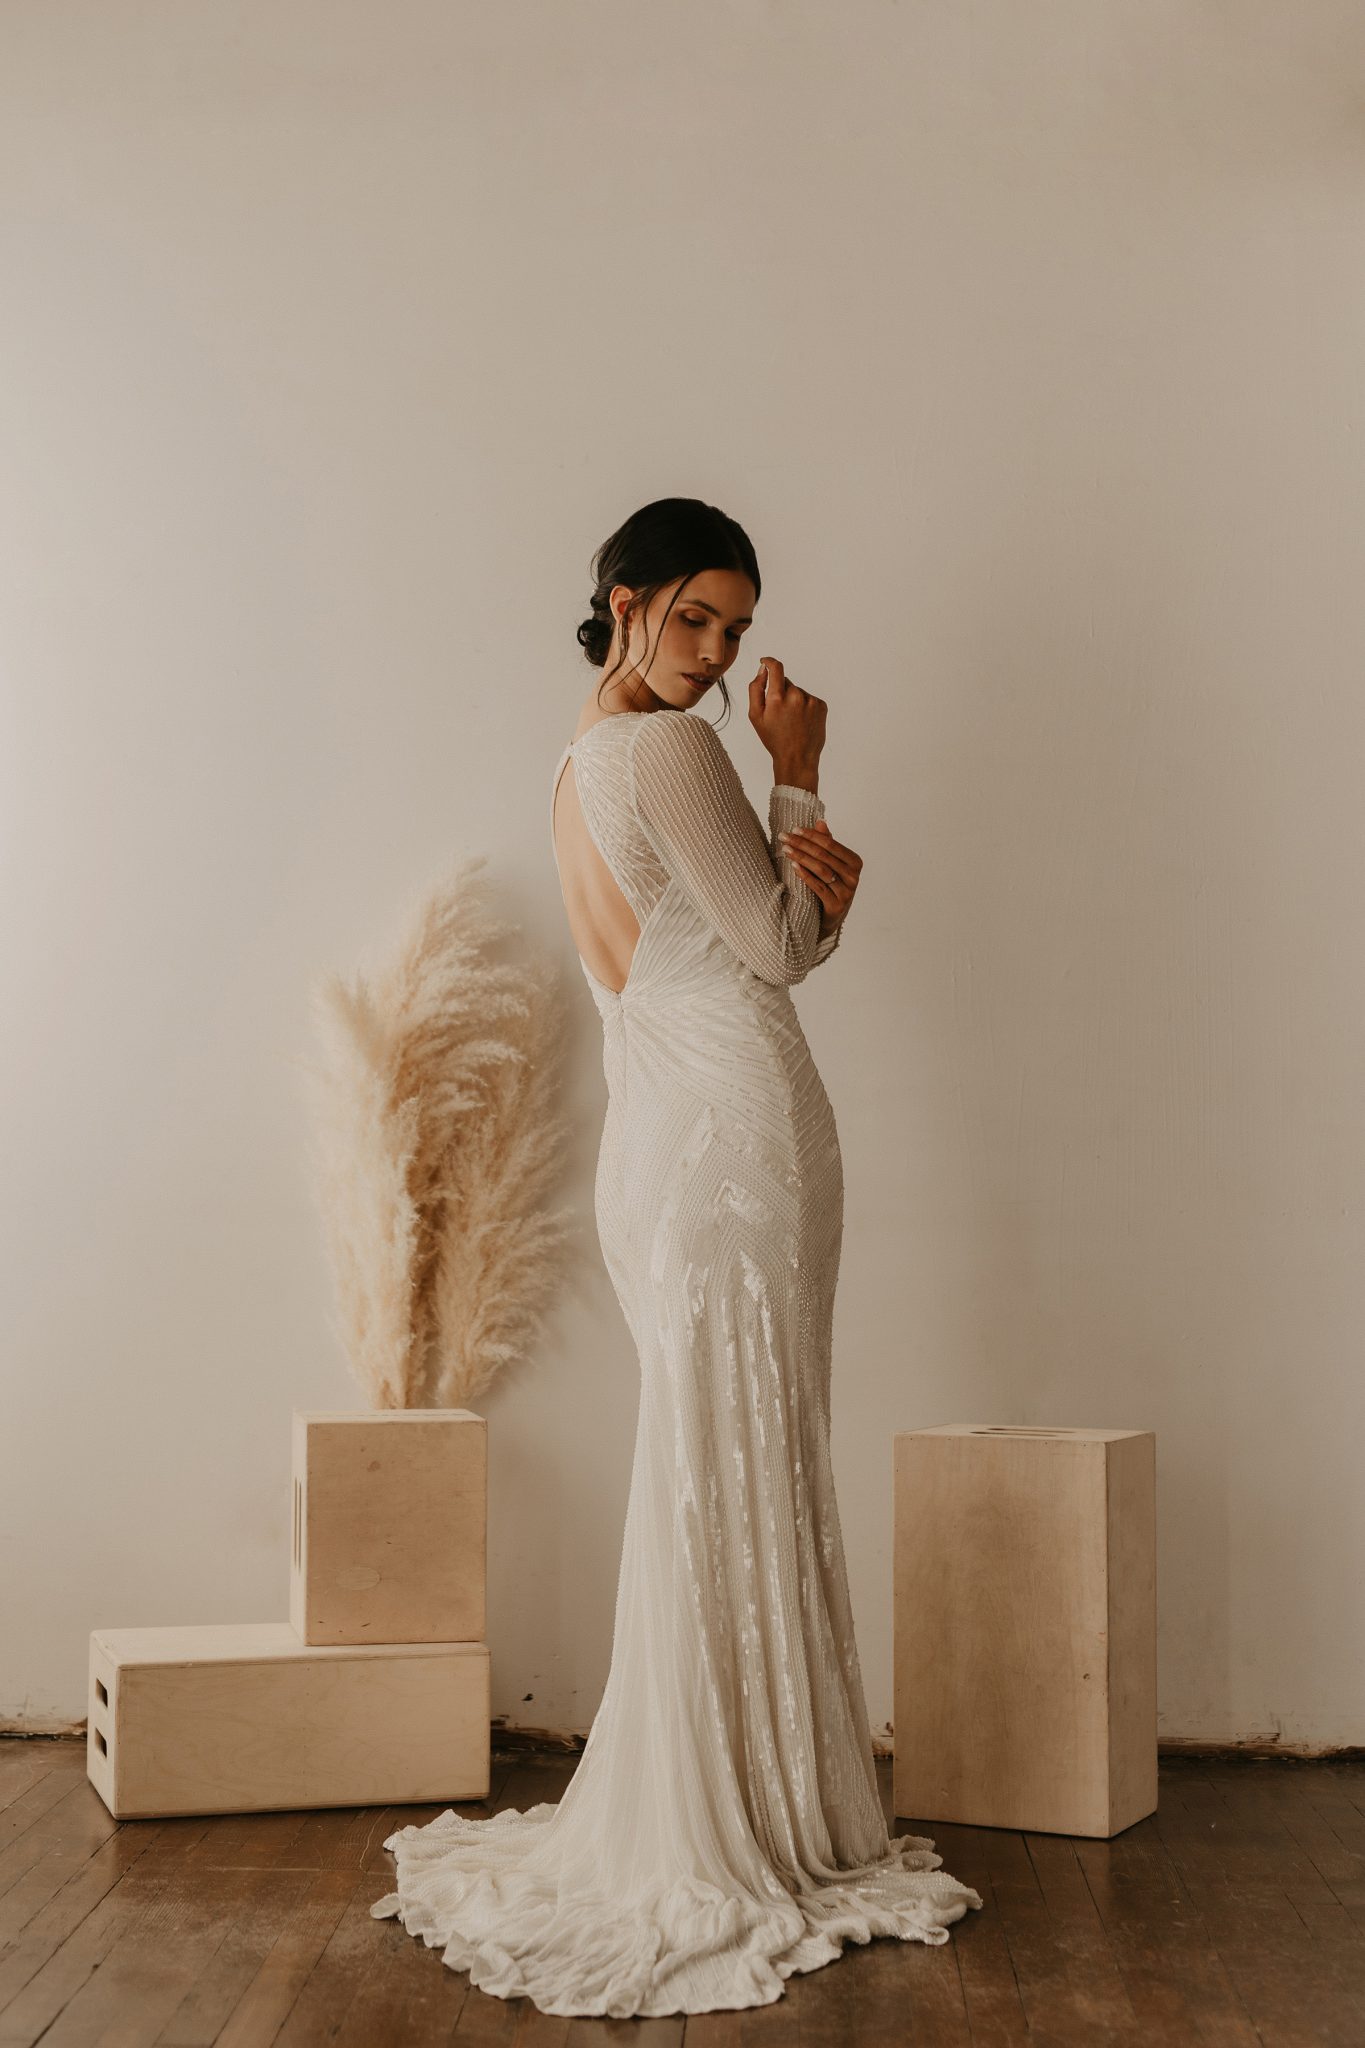 Bridal Minimalism Feature on Bronte Bride: Delica Bridal Shares All About New Bridal Trends & Dress Shopping During Covid, wedding dress shopping, bridal feature